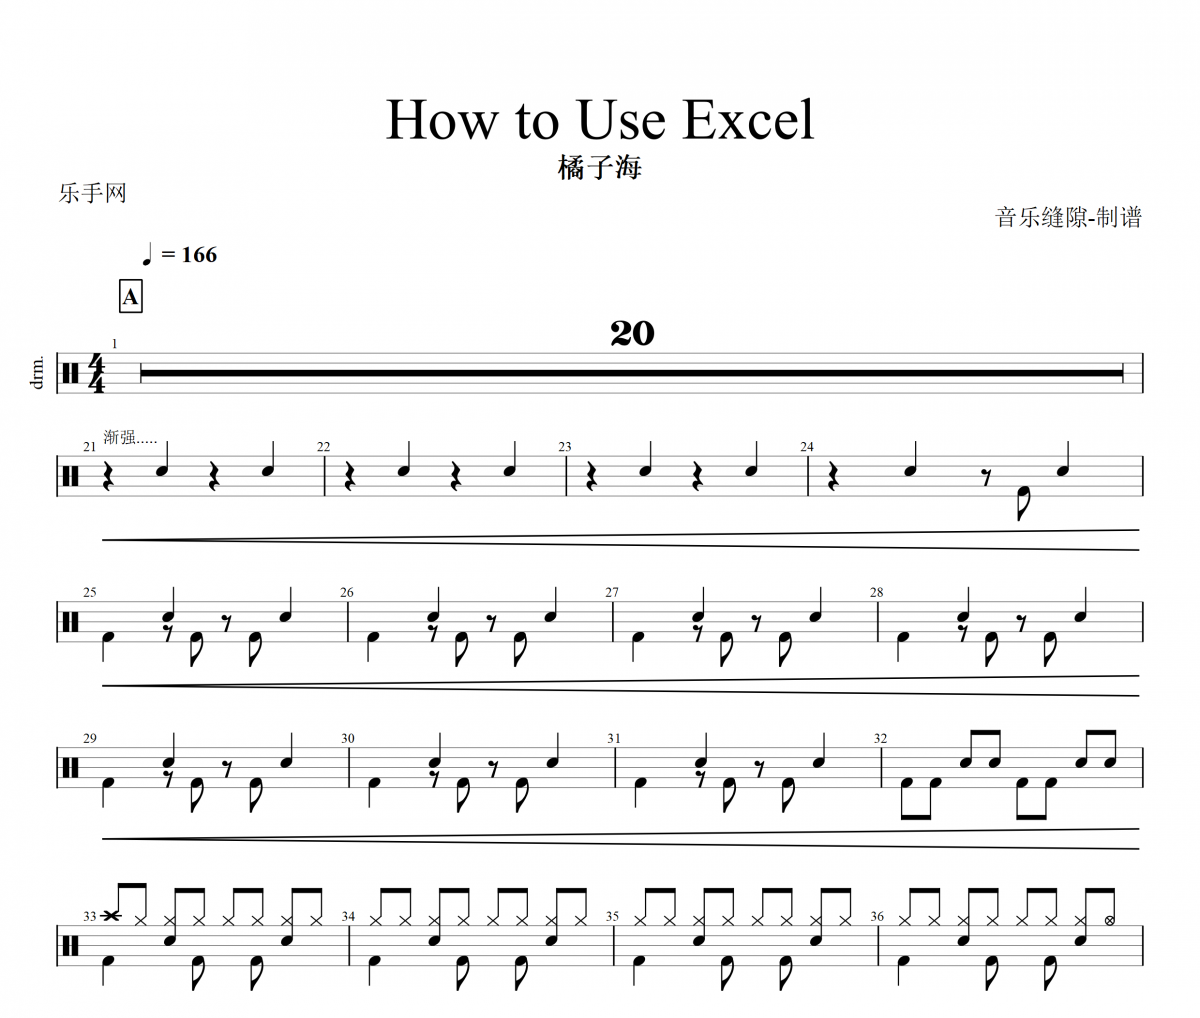 How to Use Excel鼓谱 橘子海《How to Use Excel》架子鼓谱+动态视频